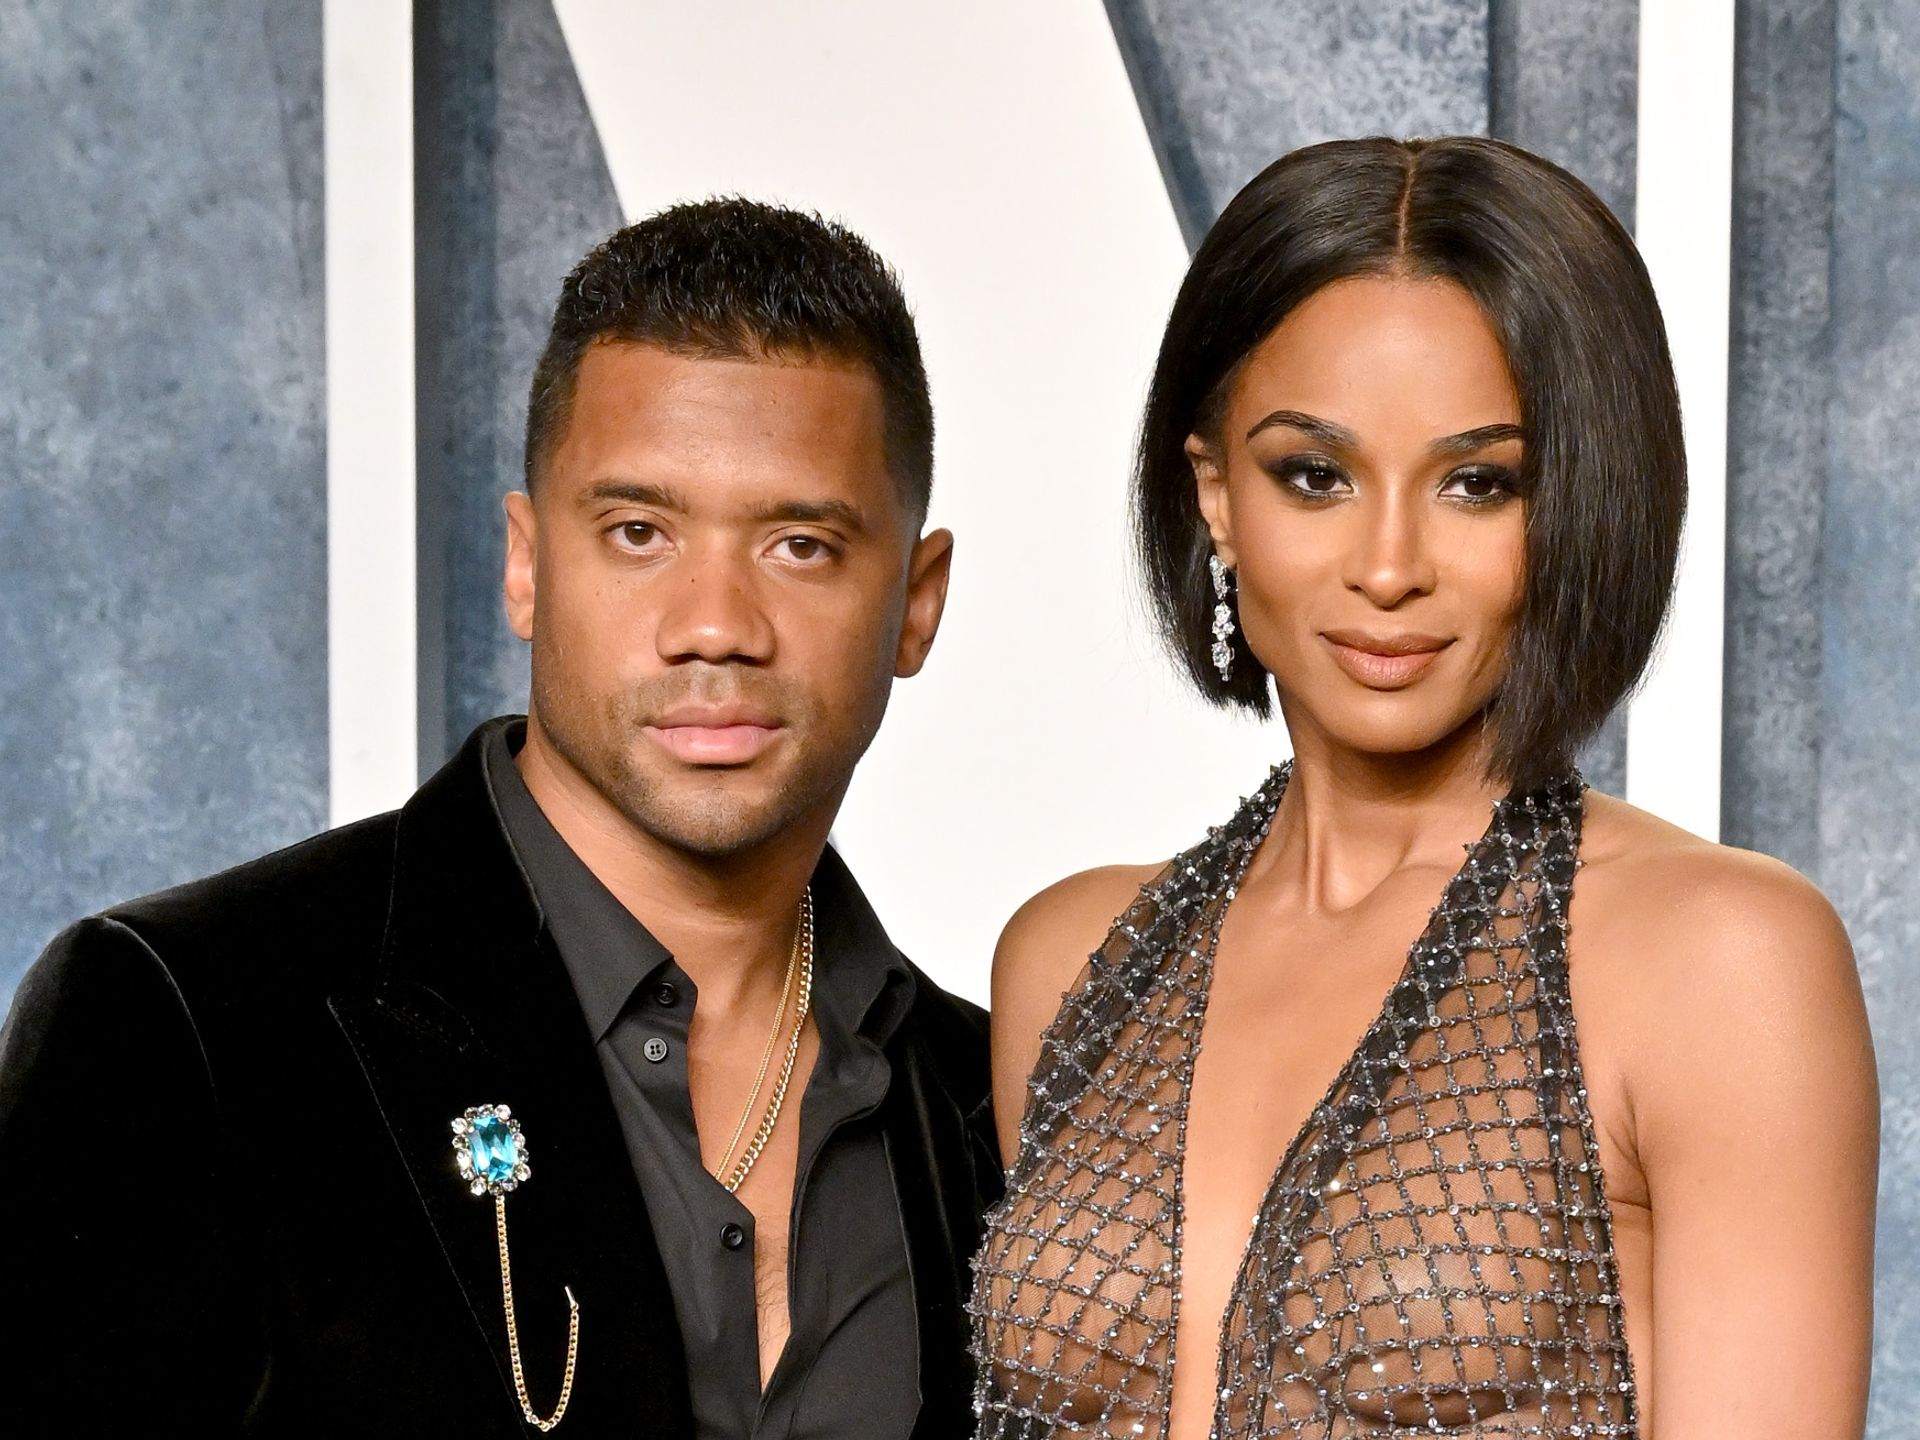 Ciara shows off her growing baby bump in white dress while taking a selfie  with her husband Russell Wilson